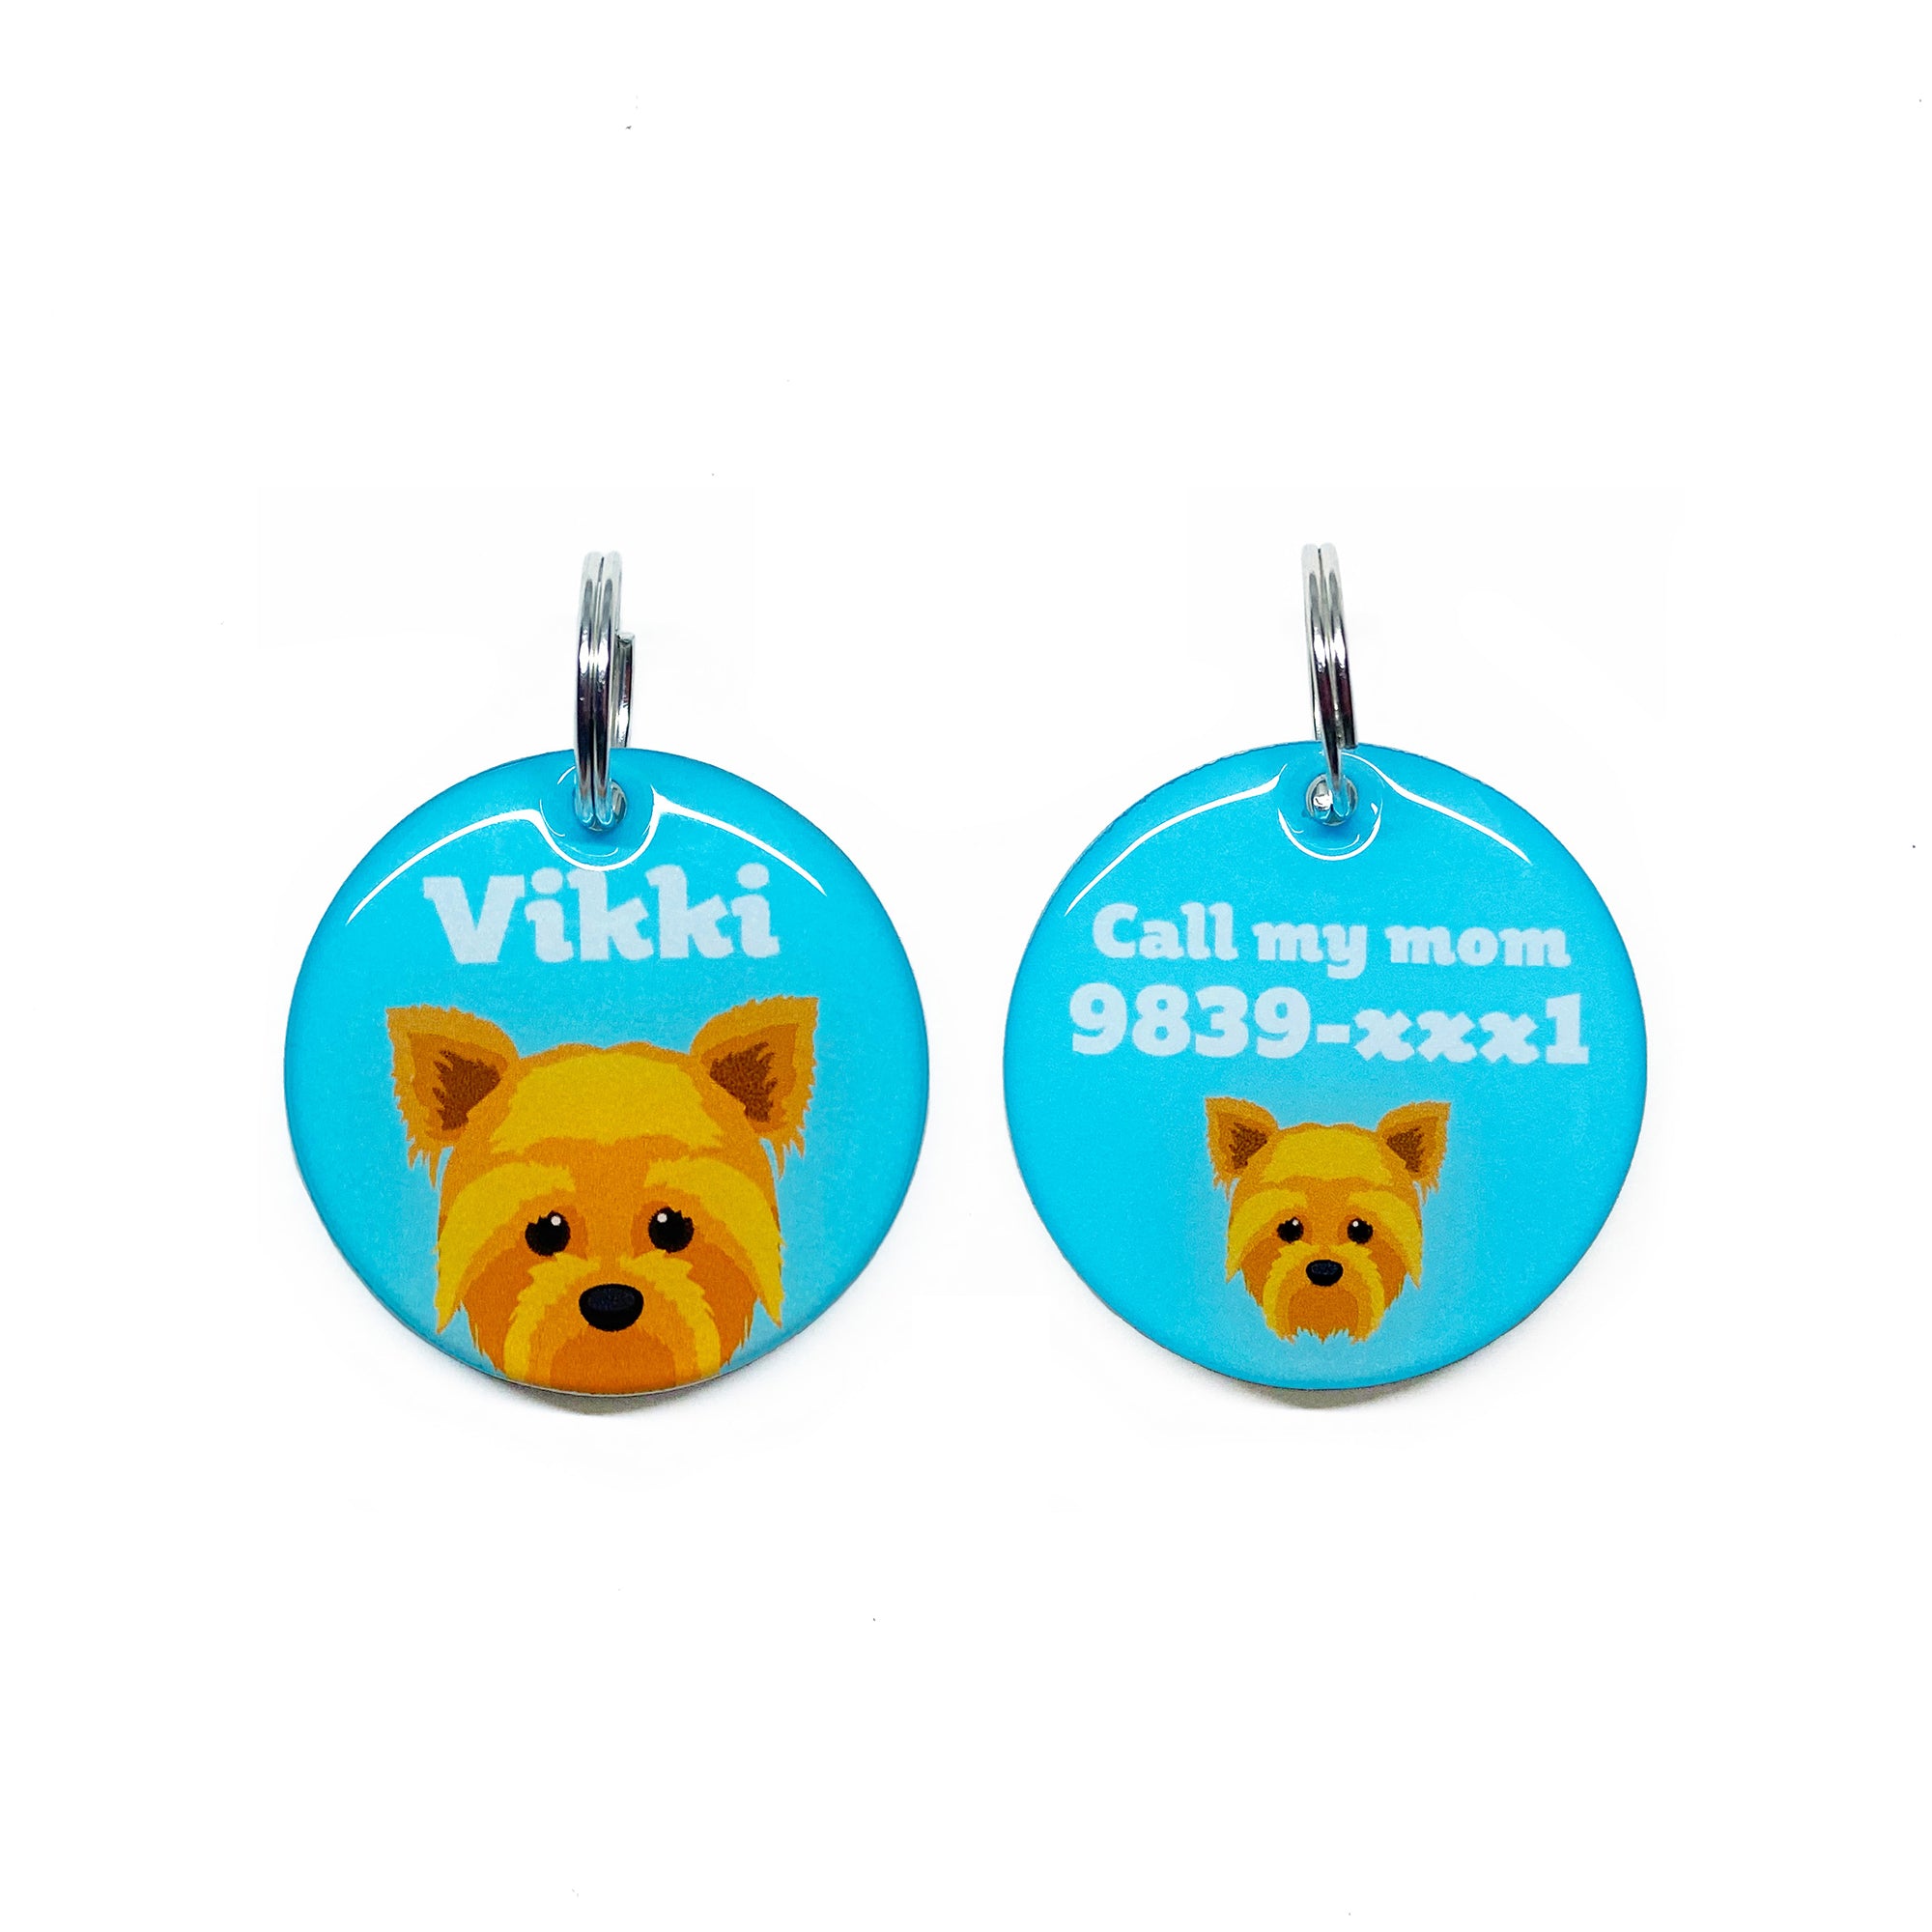 Yorkshire Terrier - 2x Tags Dog Name Tags by Bashtags